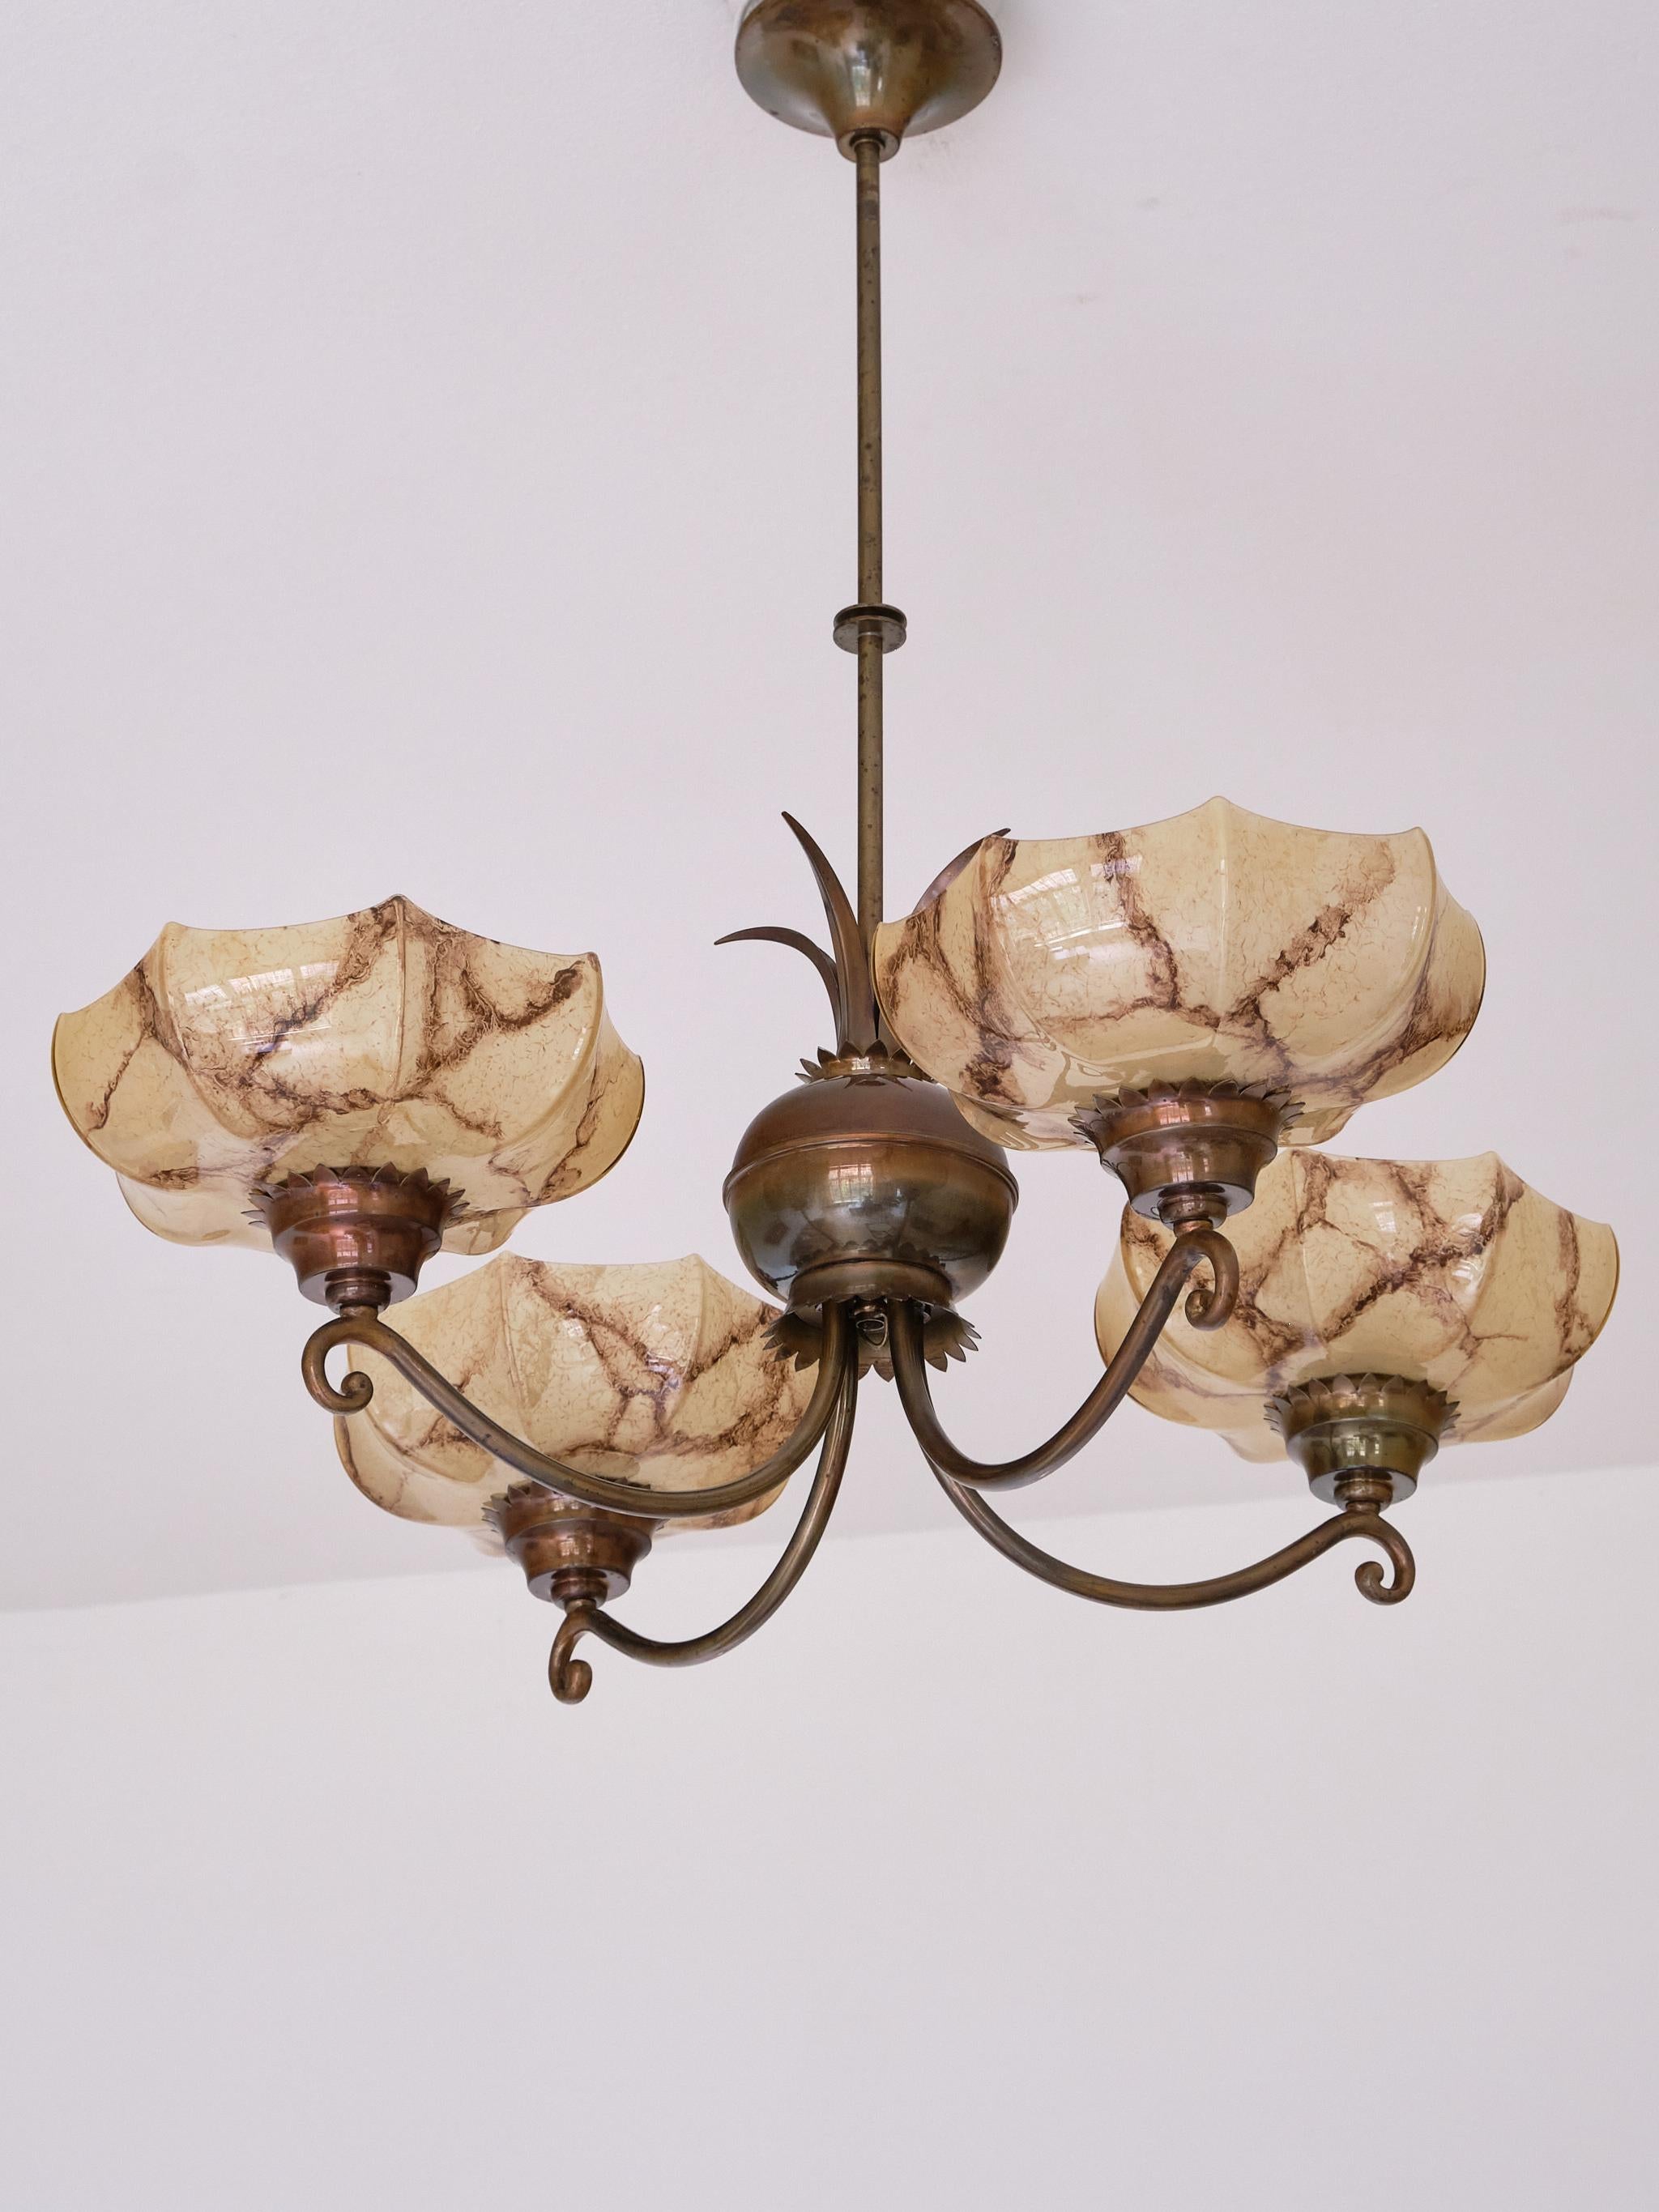 Harald Notini Chandelier in Brass and Marbled Glass, Böhlmarks, Sweden, 1927 For Sale 9